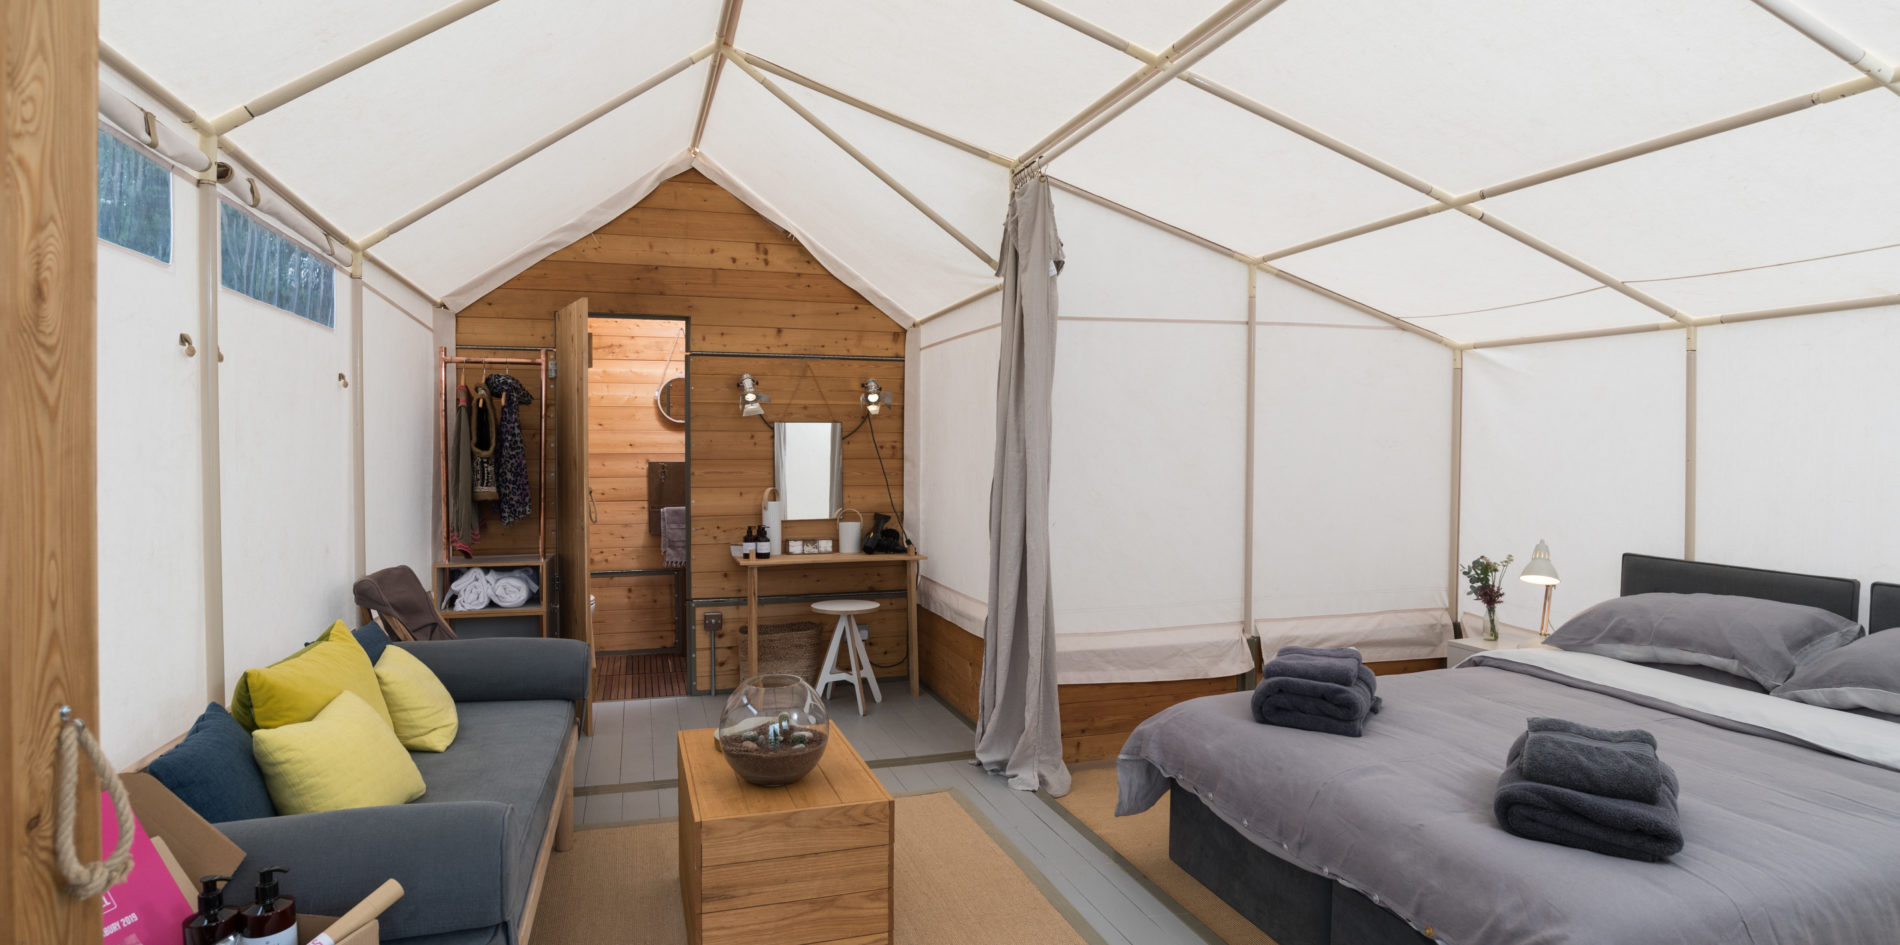 bed and living area details - luxury suite luxury camping accommodation